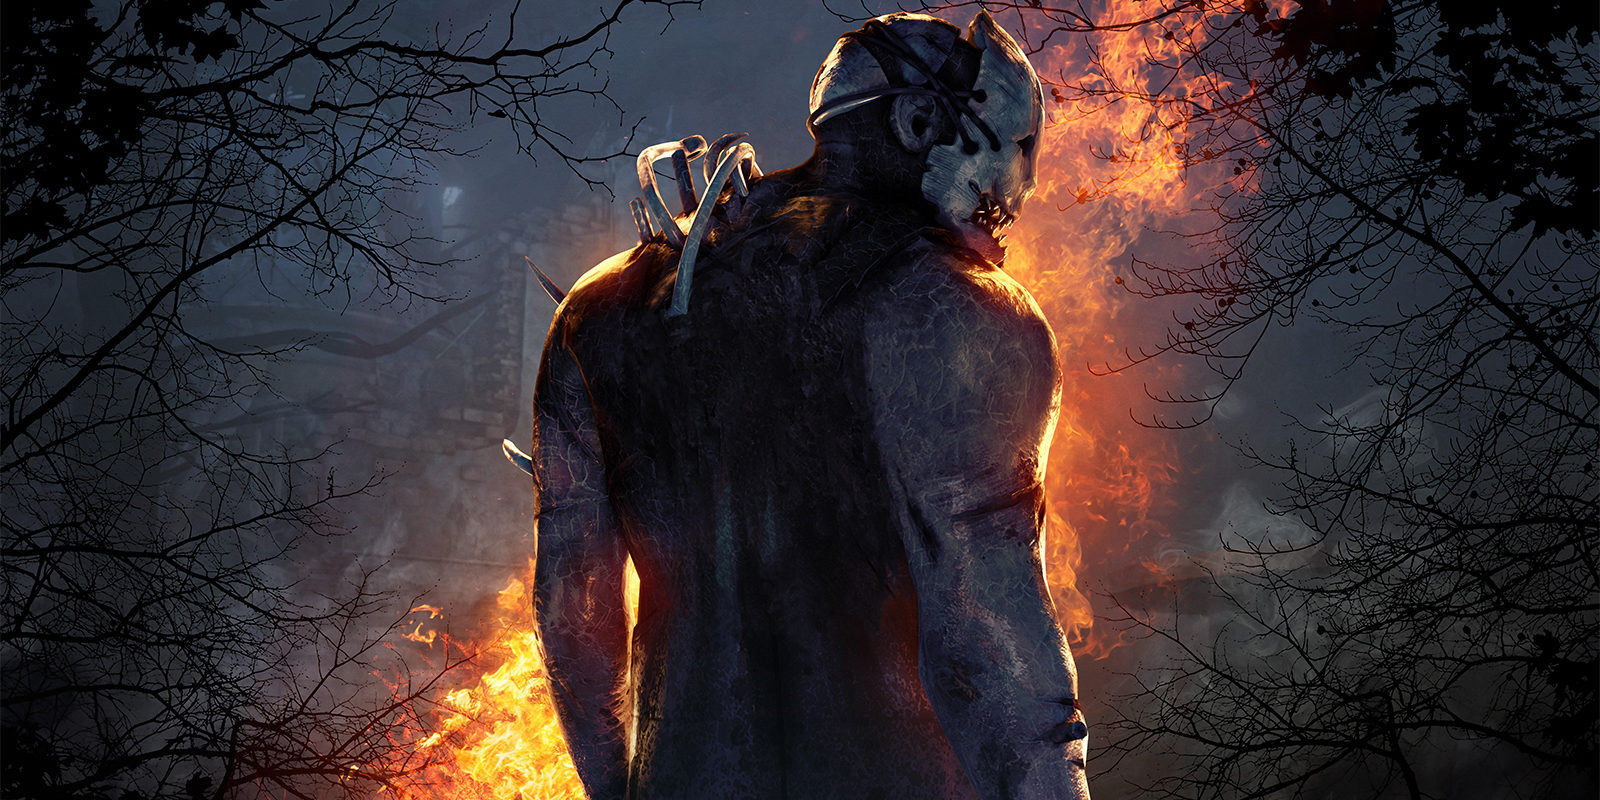 Análisis 'Dead by Daylight' para Xbox One